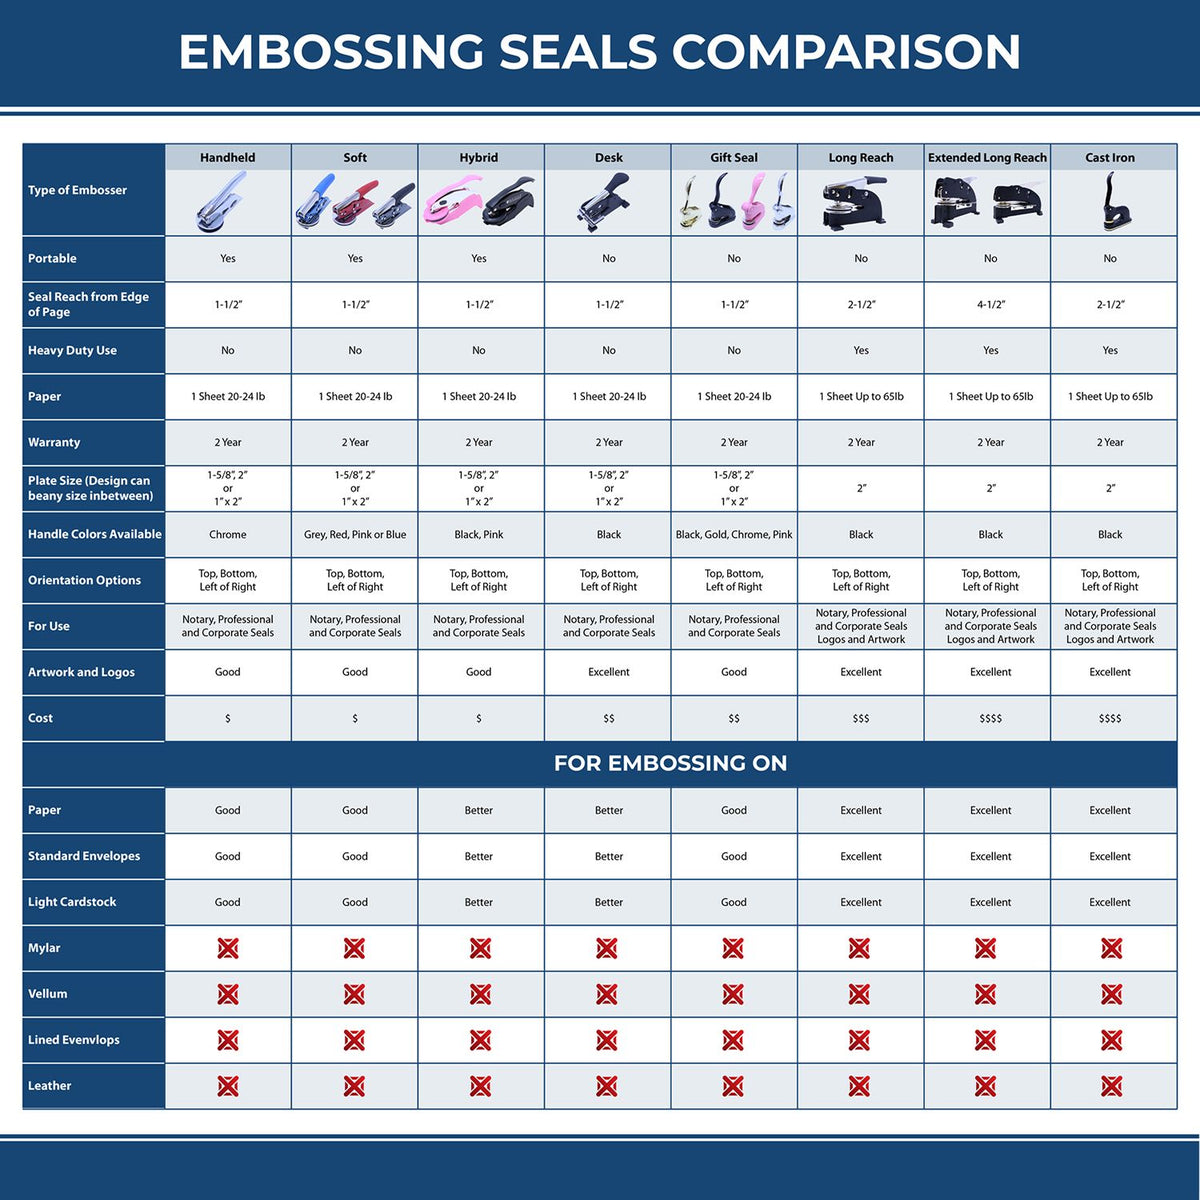 A comparison chart for the different types of mount models available for the Handheld Montana Professional Geologist Embosser